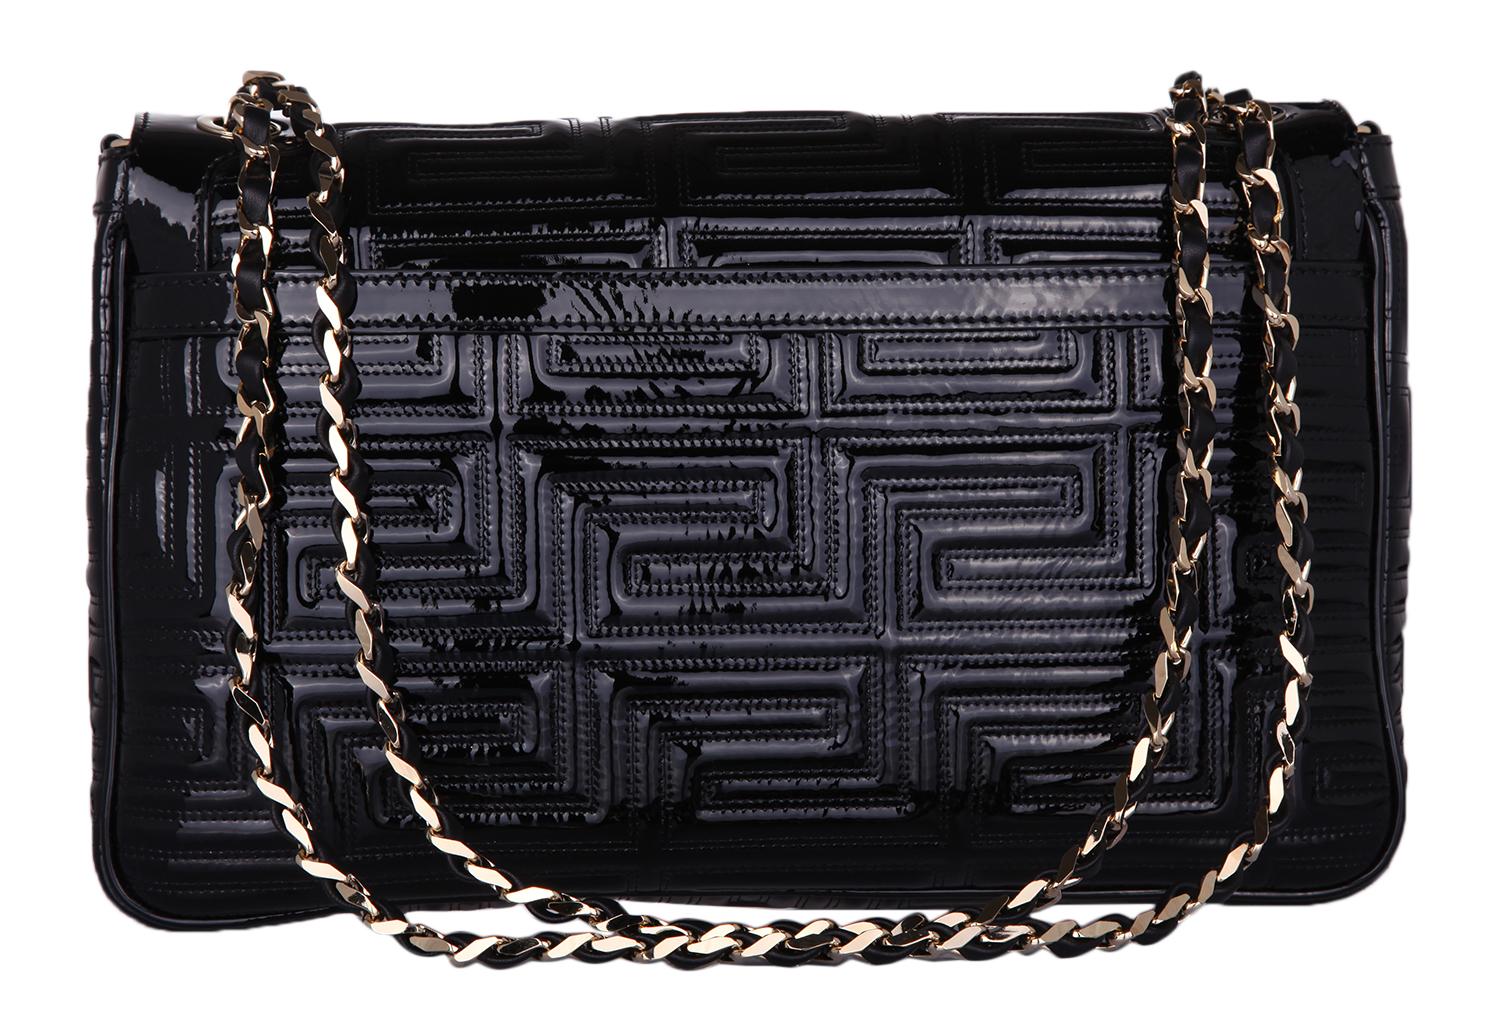 Item number: DBCD128DVRT-D41O
Color: Black
Material: patent leather
Size: width 31 cm, height 20 cm, depth 6 cm
Double shoulder strap of leather intertwined chain approx. 67 cm length
Closure: gold color couture closure
Weight in grams approx. 800